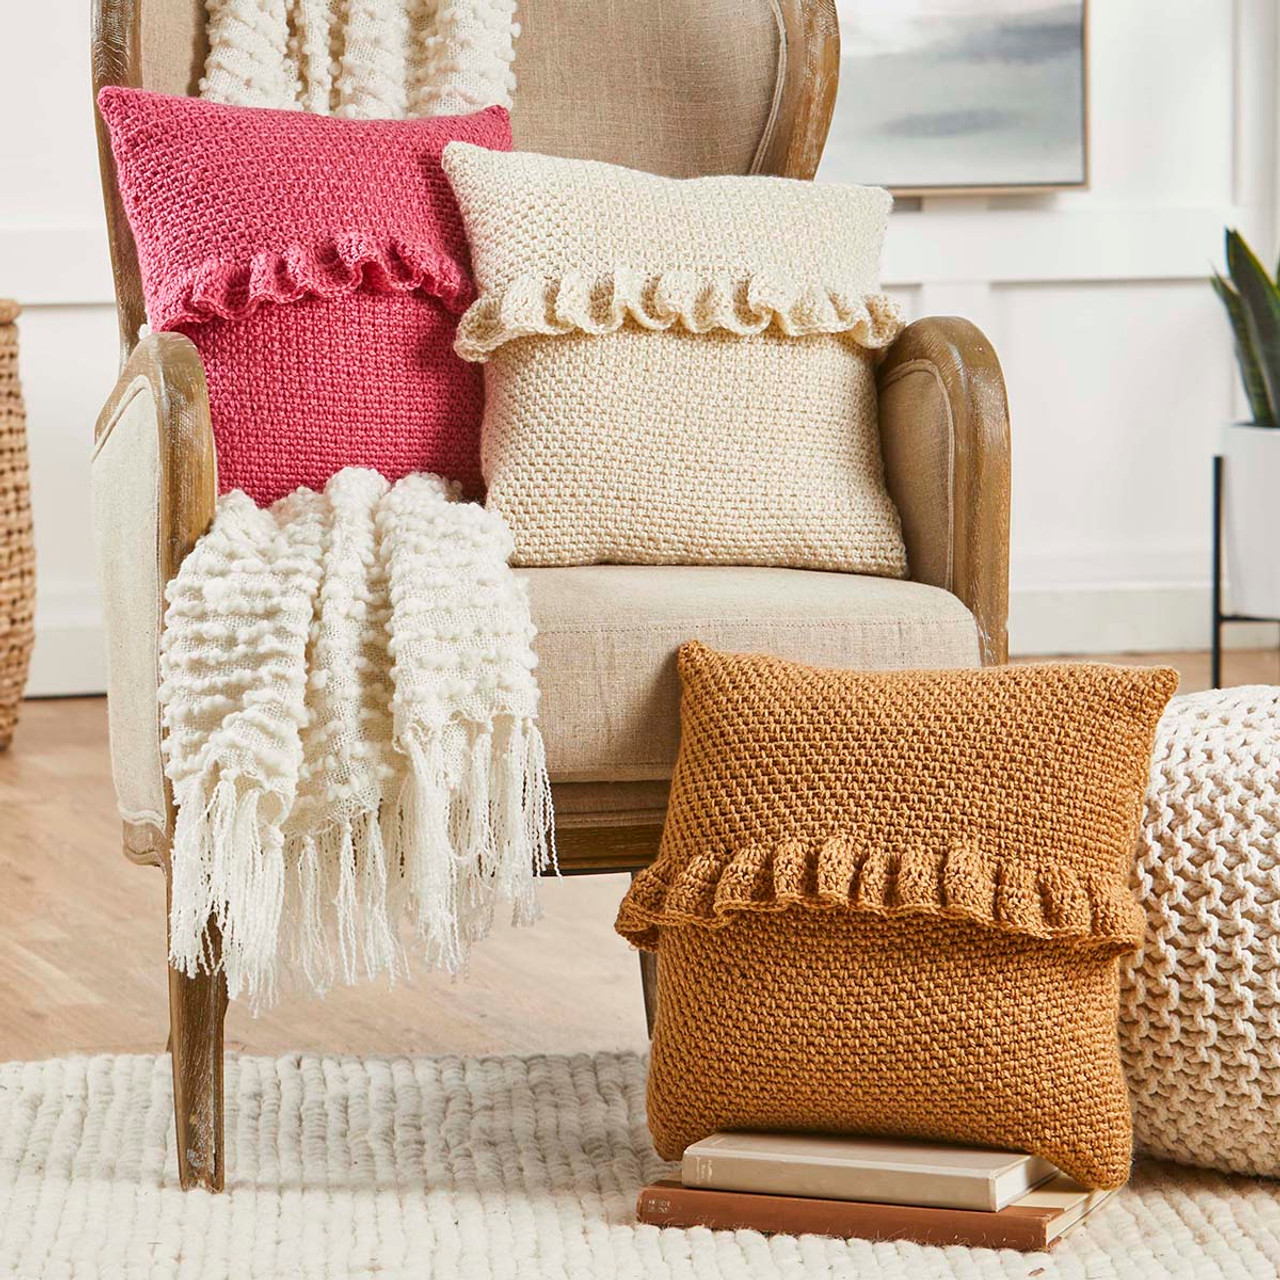 Top 10 crochet arm support pillow ideas and inspiration